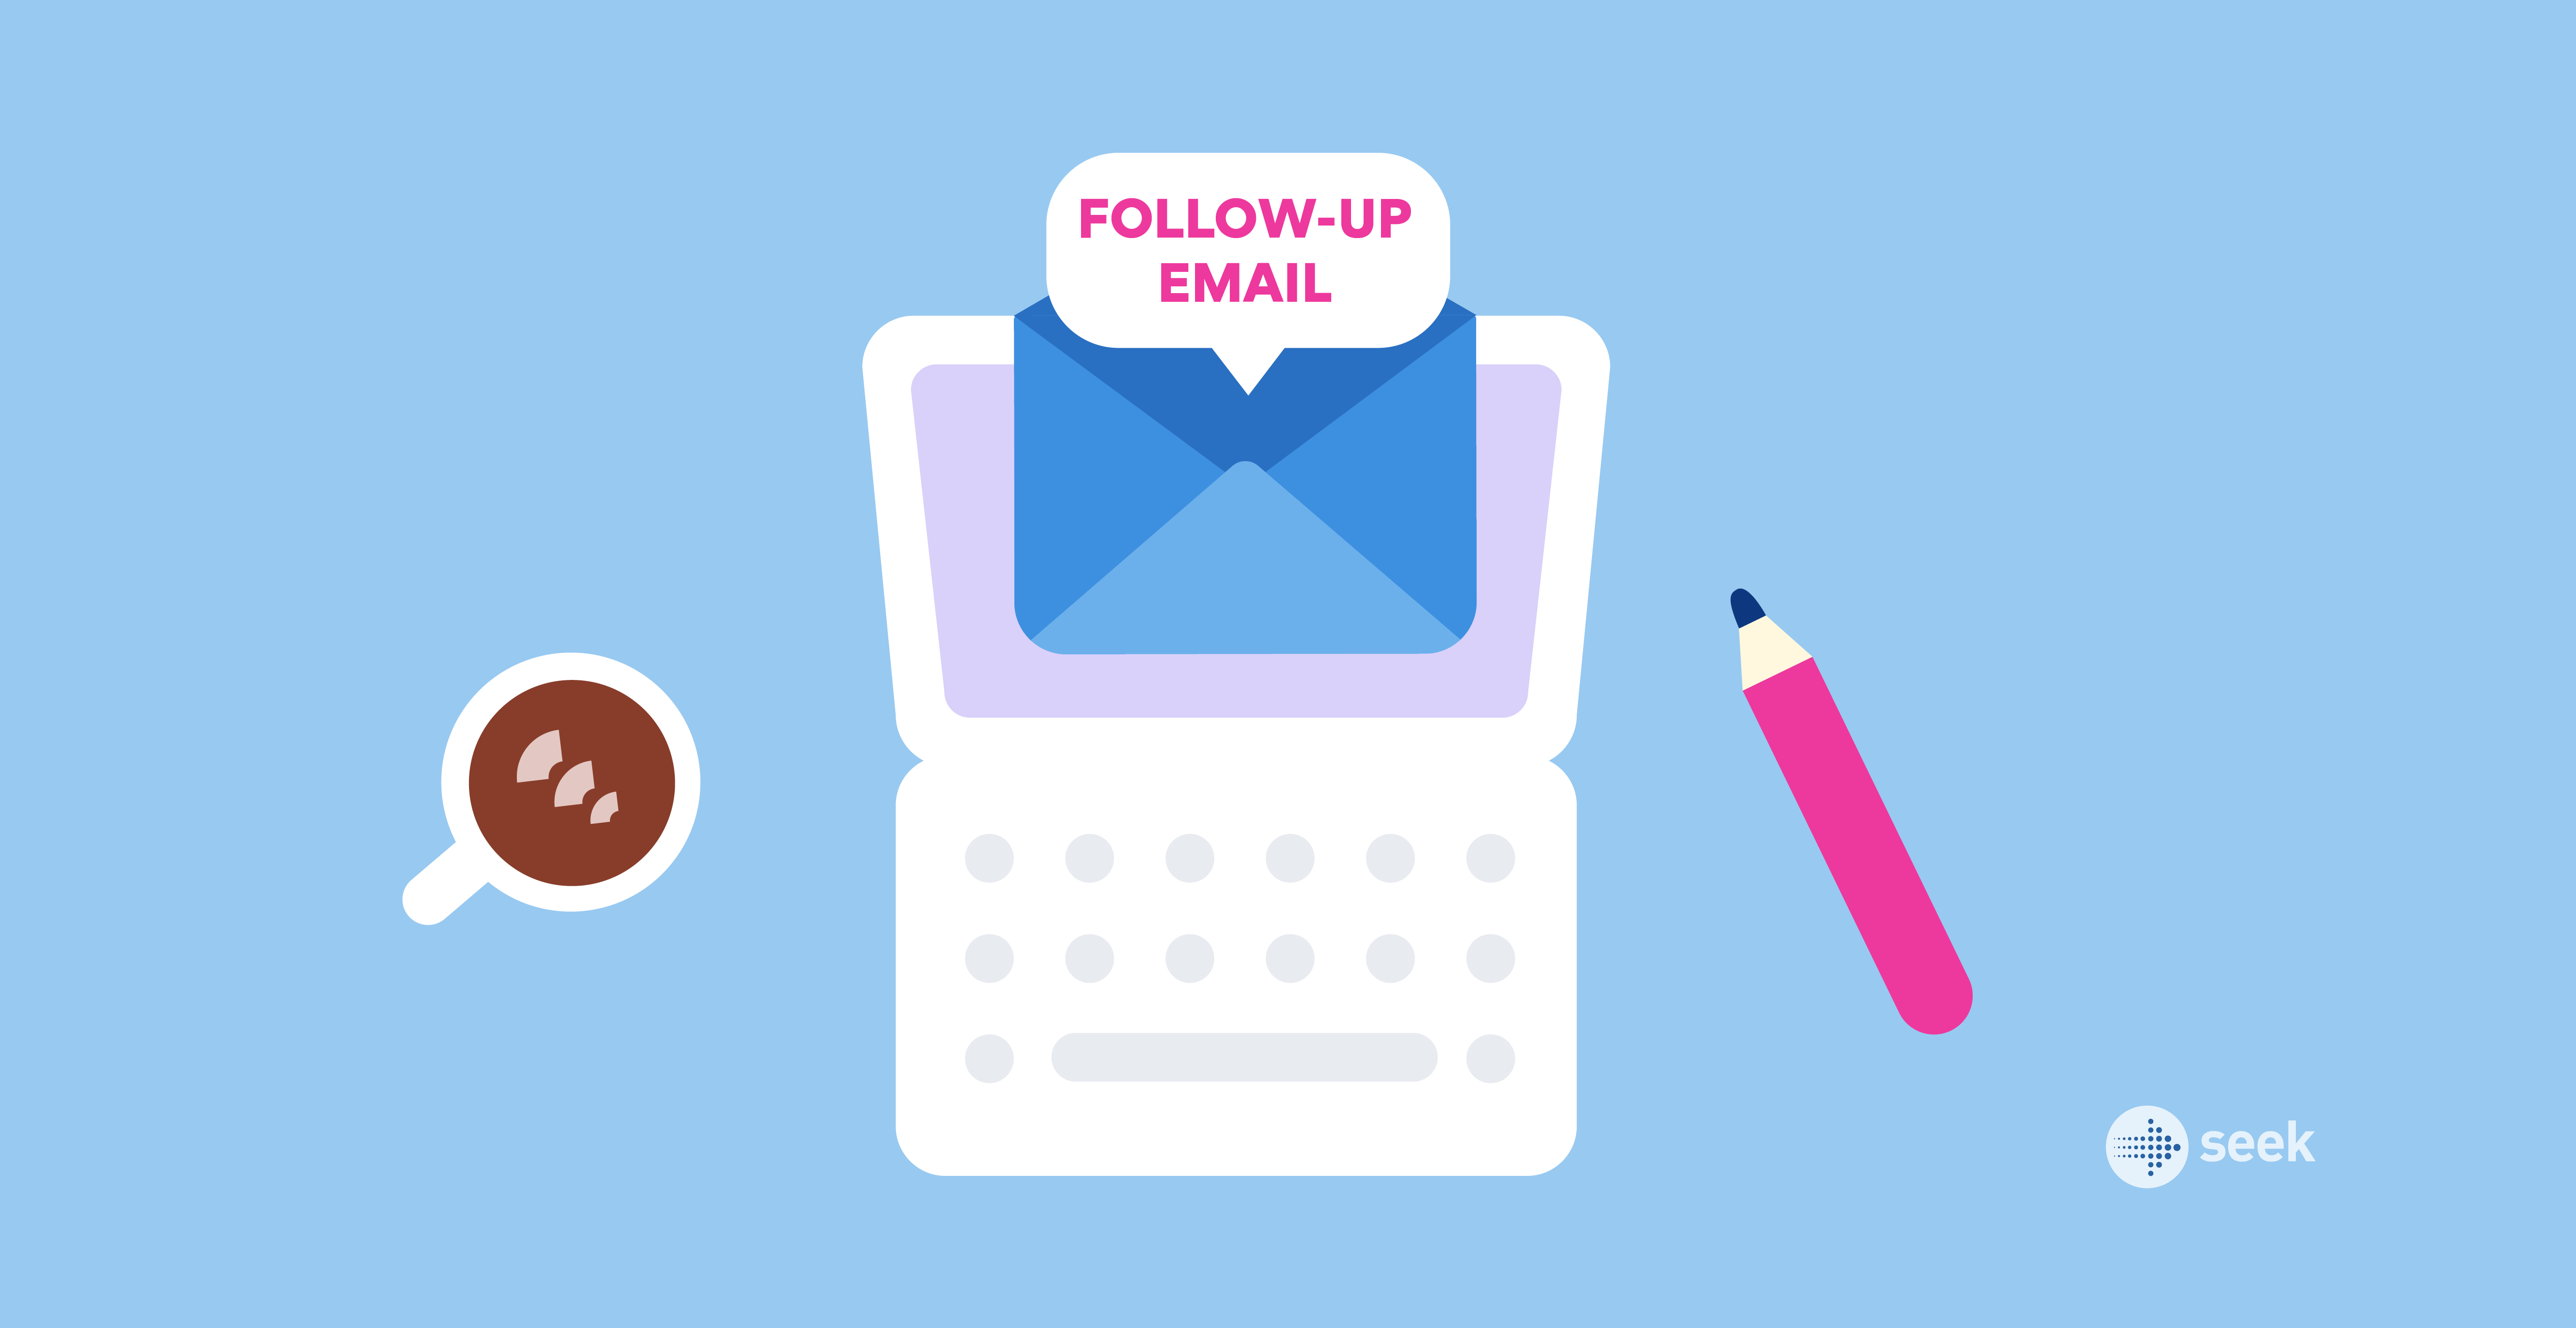 How to write a follow up email for a job application: Templates and tips